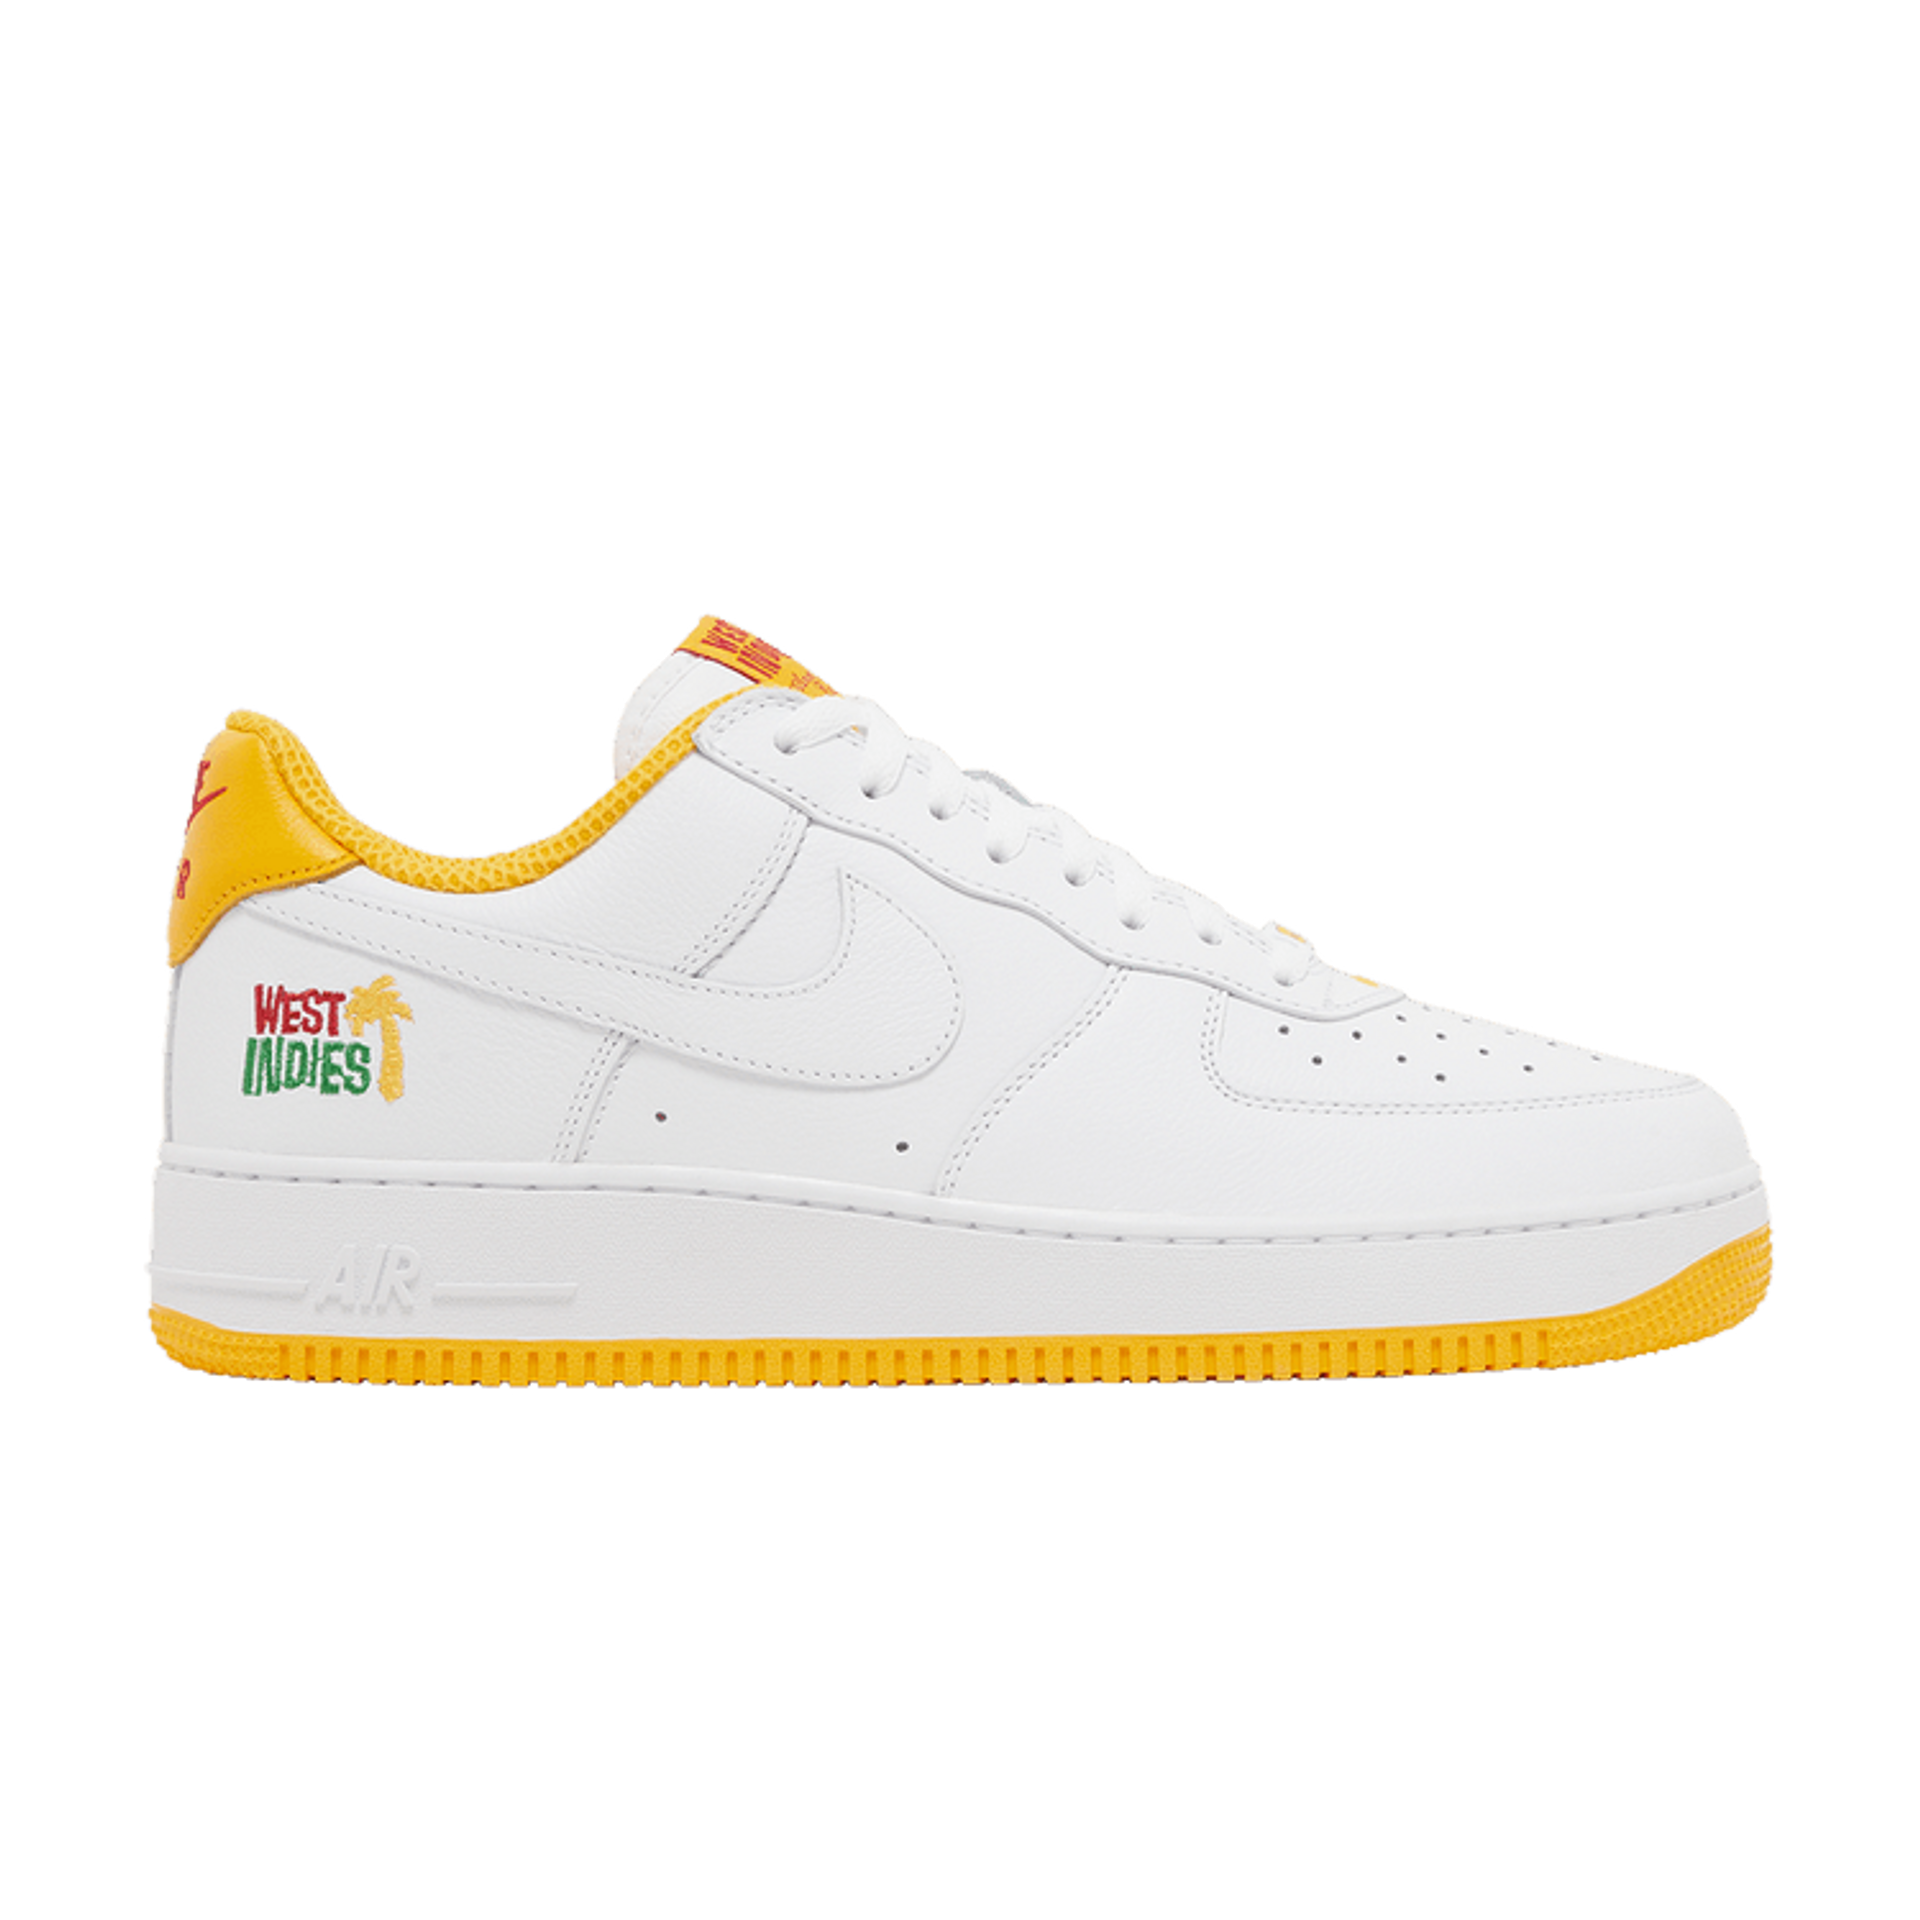 Nike Air Force 1 Low 'West Indies - University Gold'